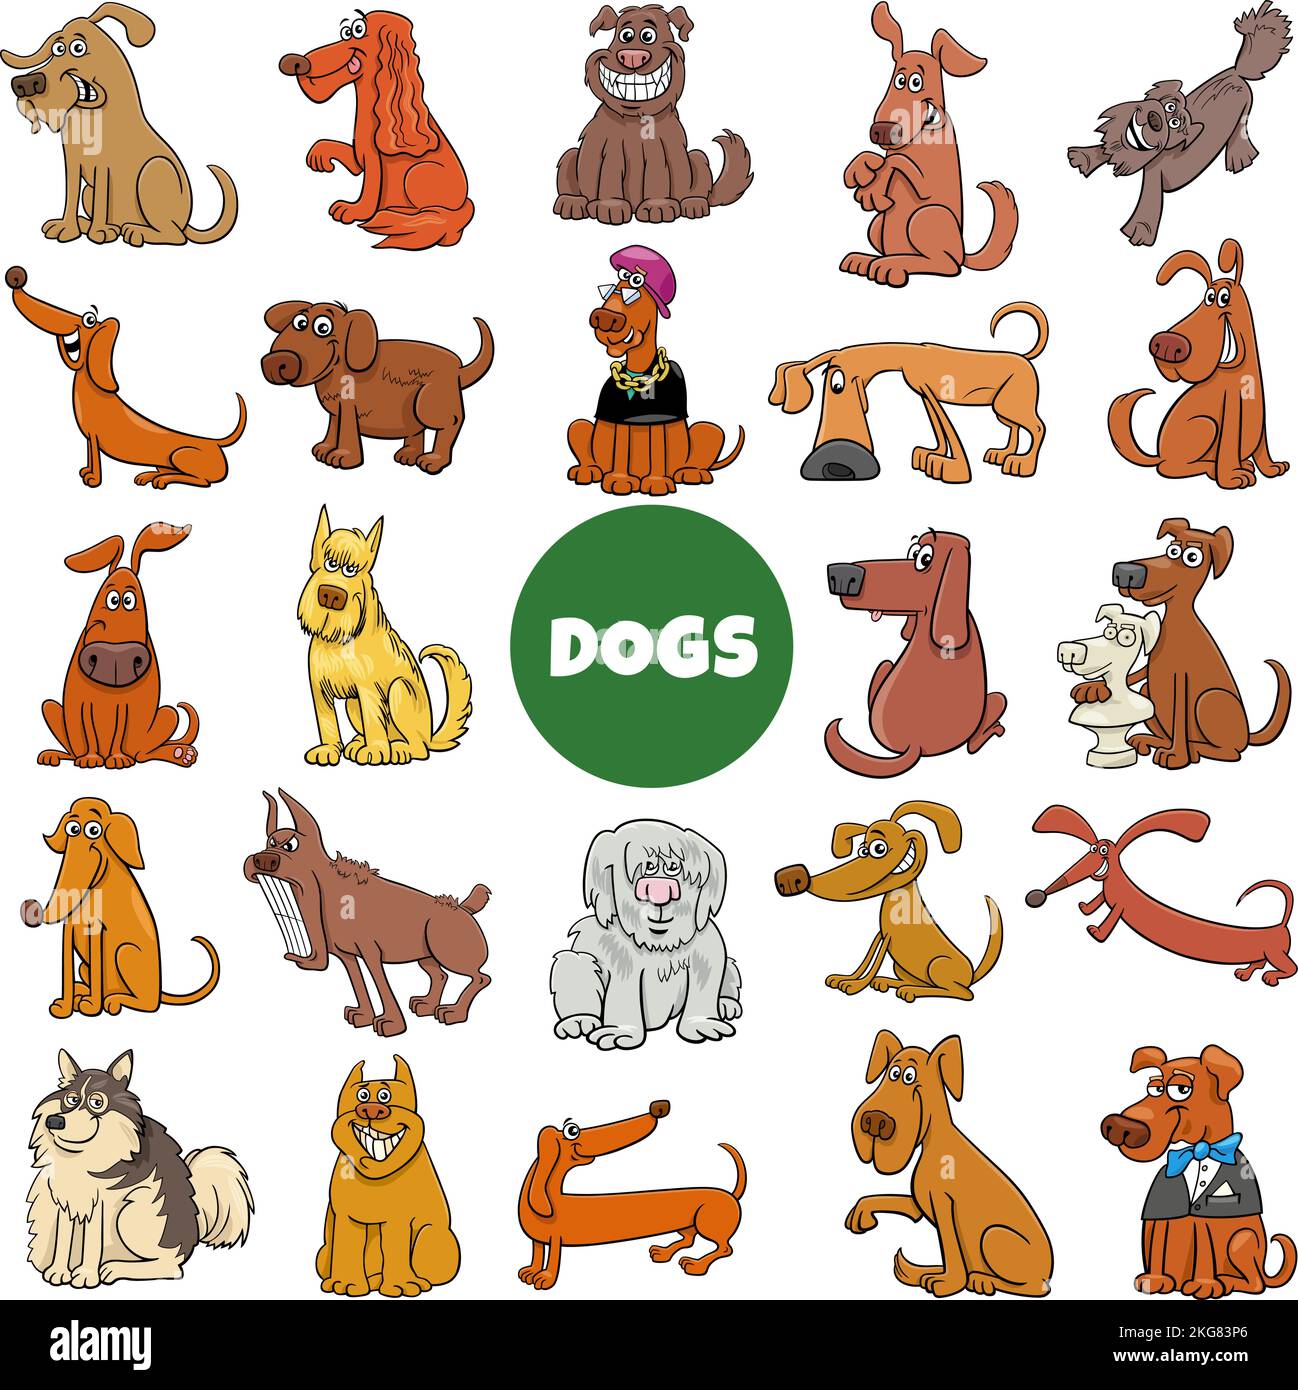 Cartoon illustration of dogs and puppies animal comic characters big set Stock Vector